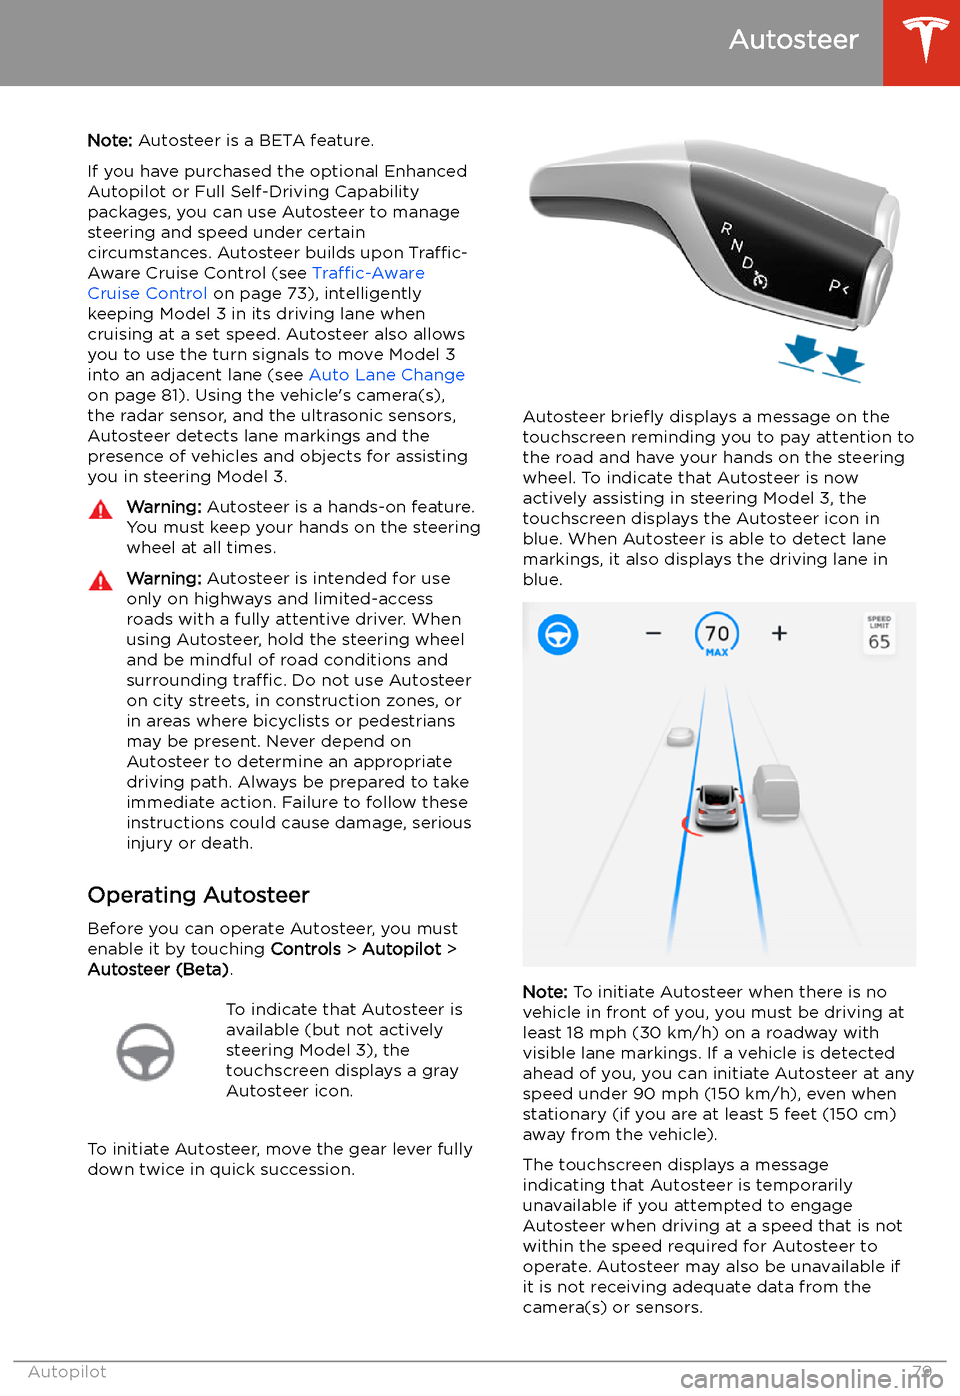 TESLA MODEL 3 2019   (Europe) Manual PDF Autosteer
Note:  Autosteer is a BETA feature.
If you have purchased the optional Enhanced Autopilot or Full Self-Driving Capabilitypackages, you can use Autosteer to manage
steering and speed under ce